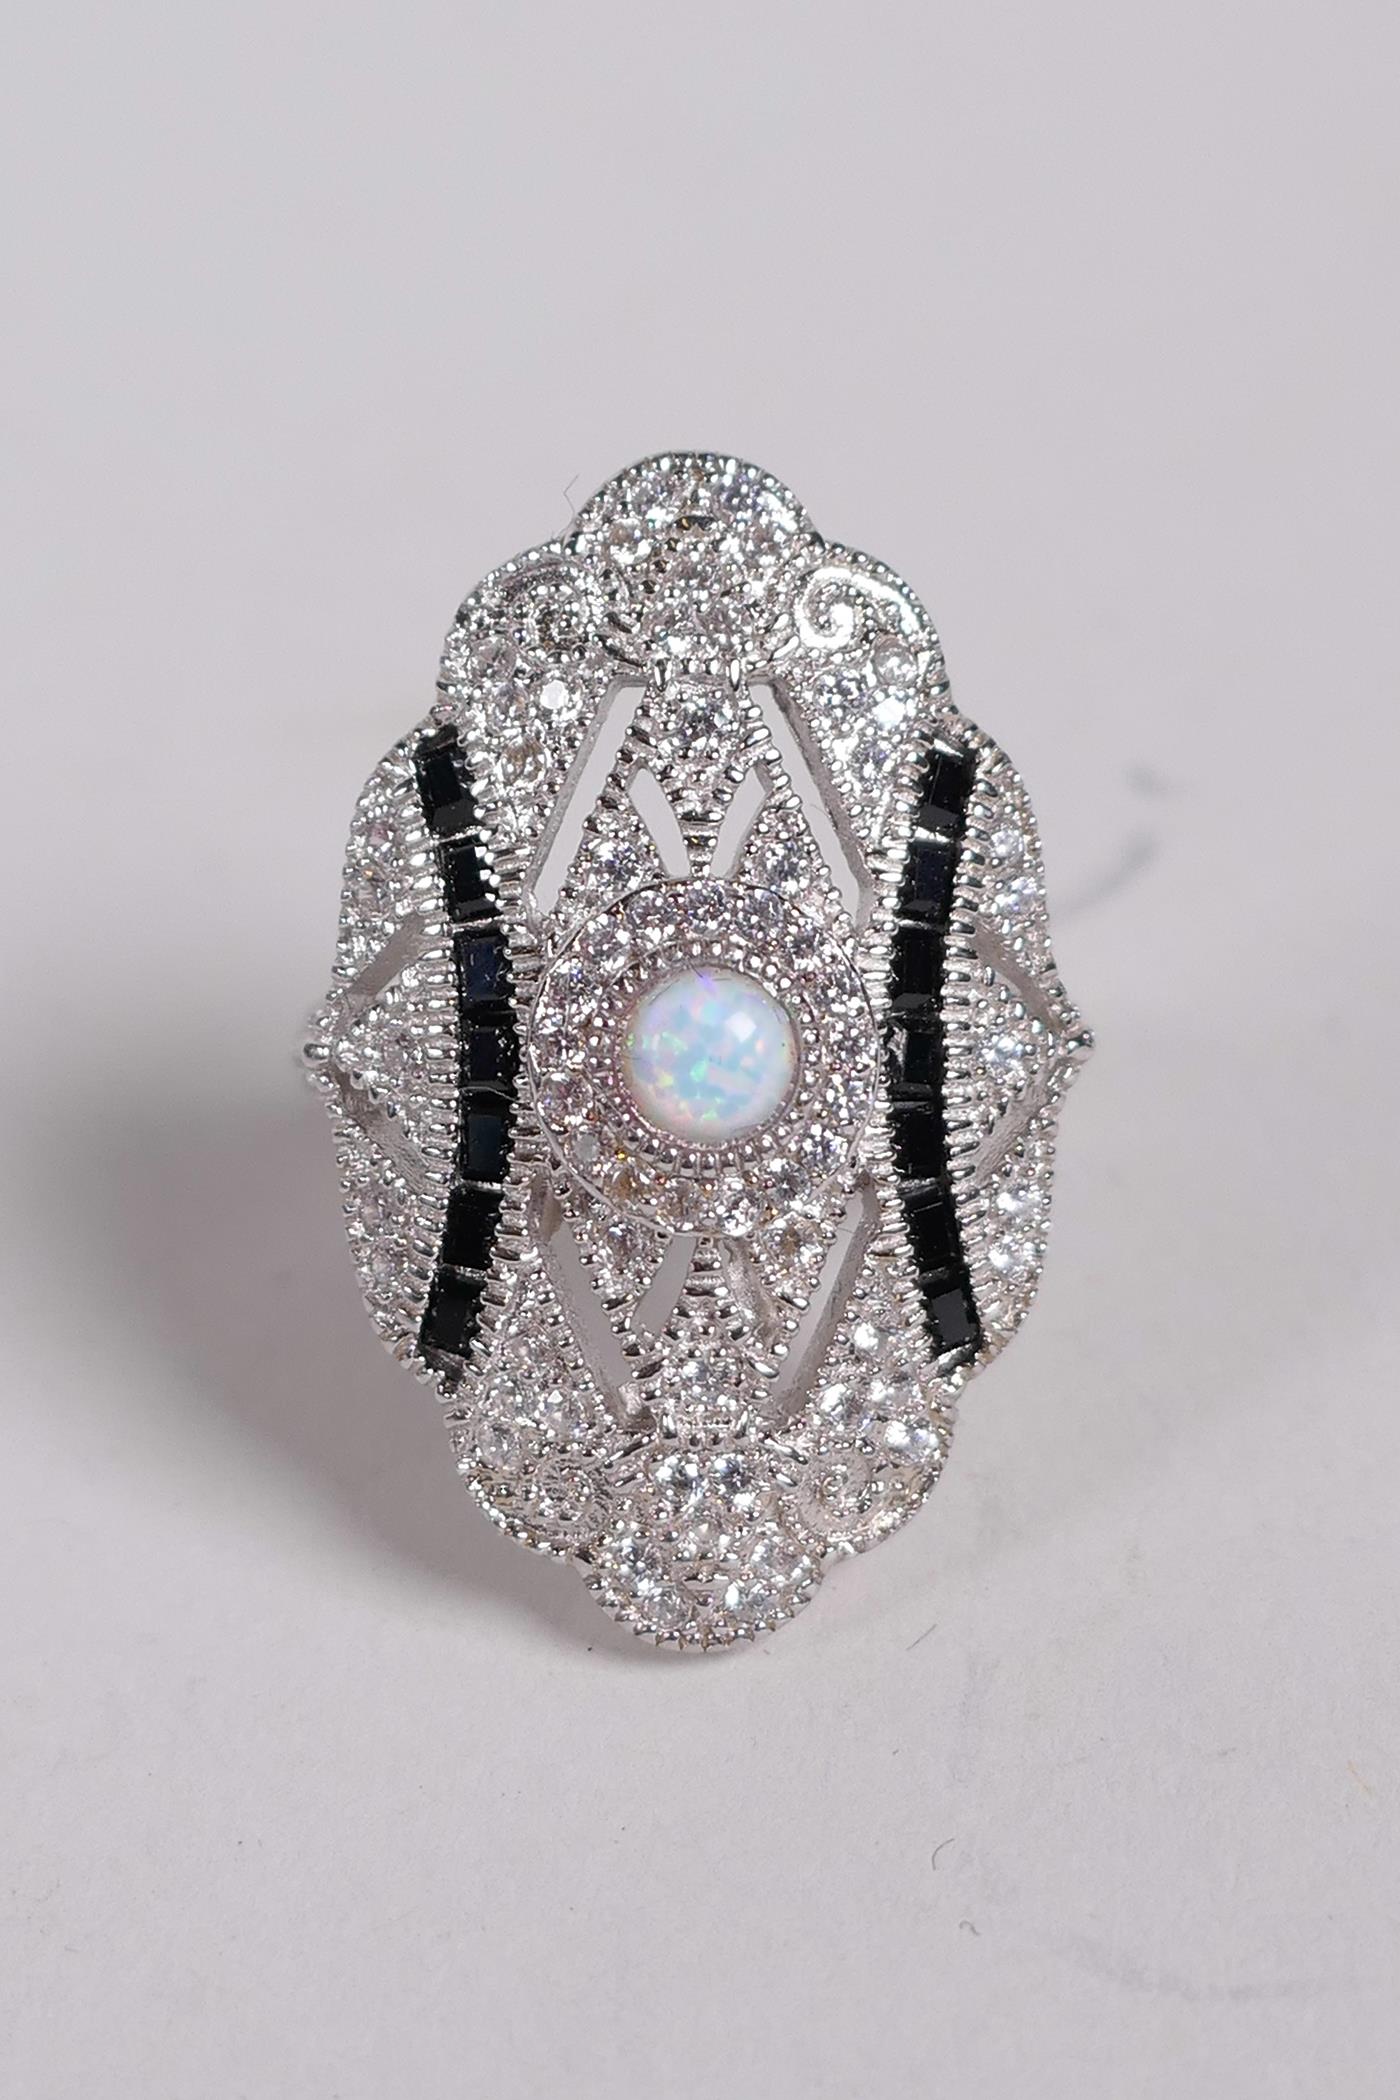 An Art Deco style 925 silver, cubic zirconium, sapphire and opalite set dress ring, approximate size